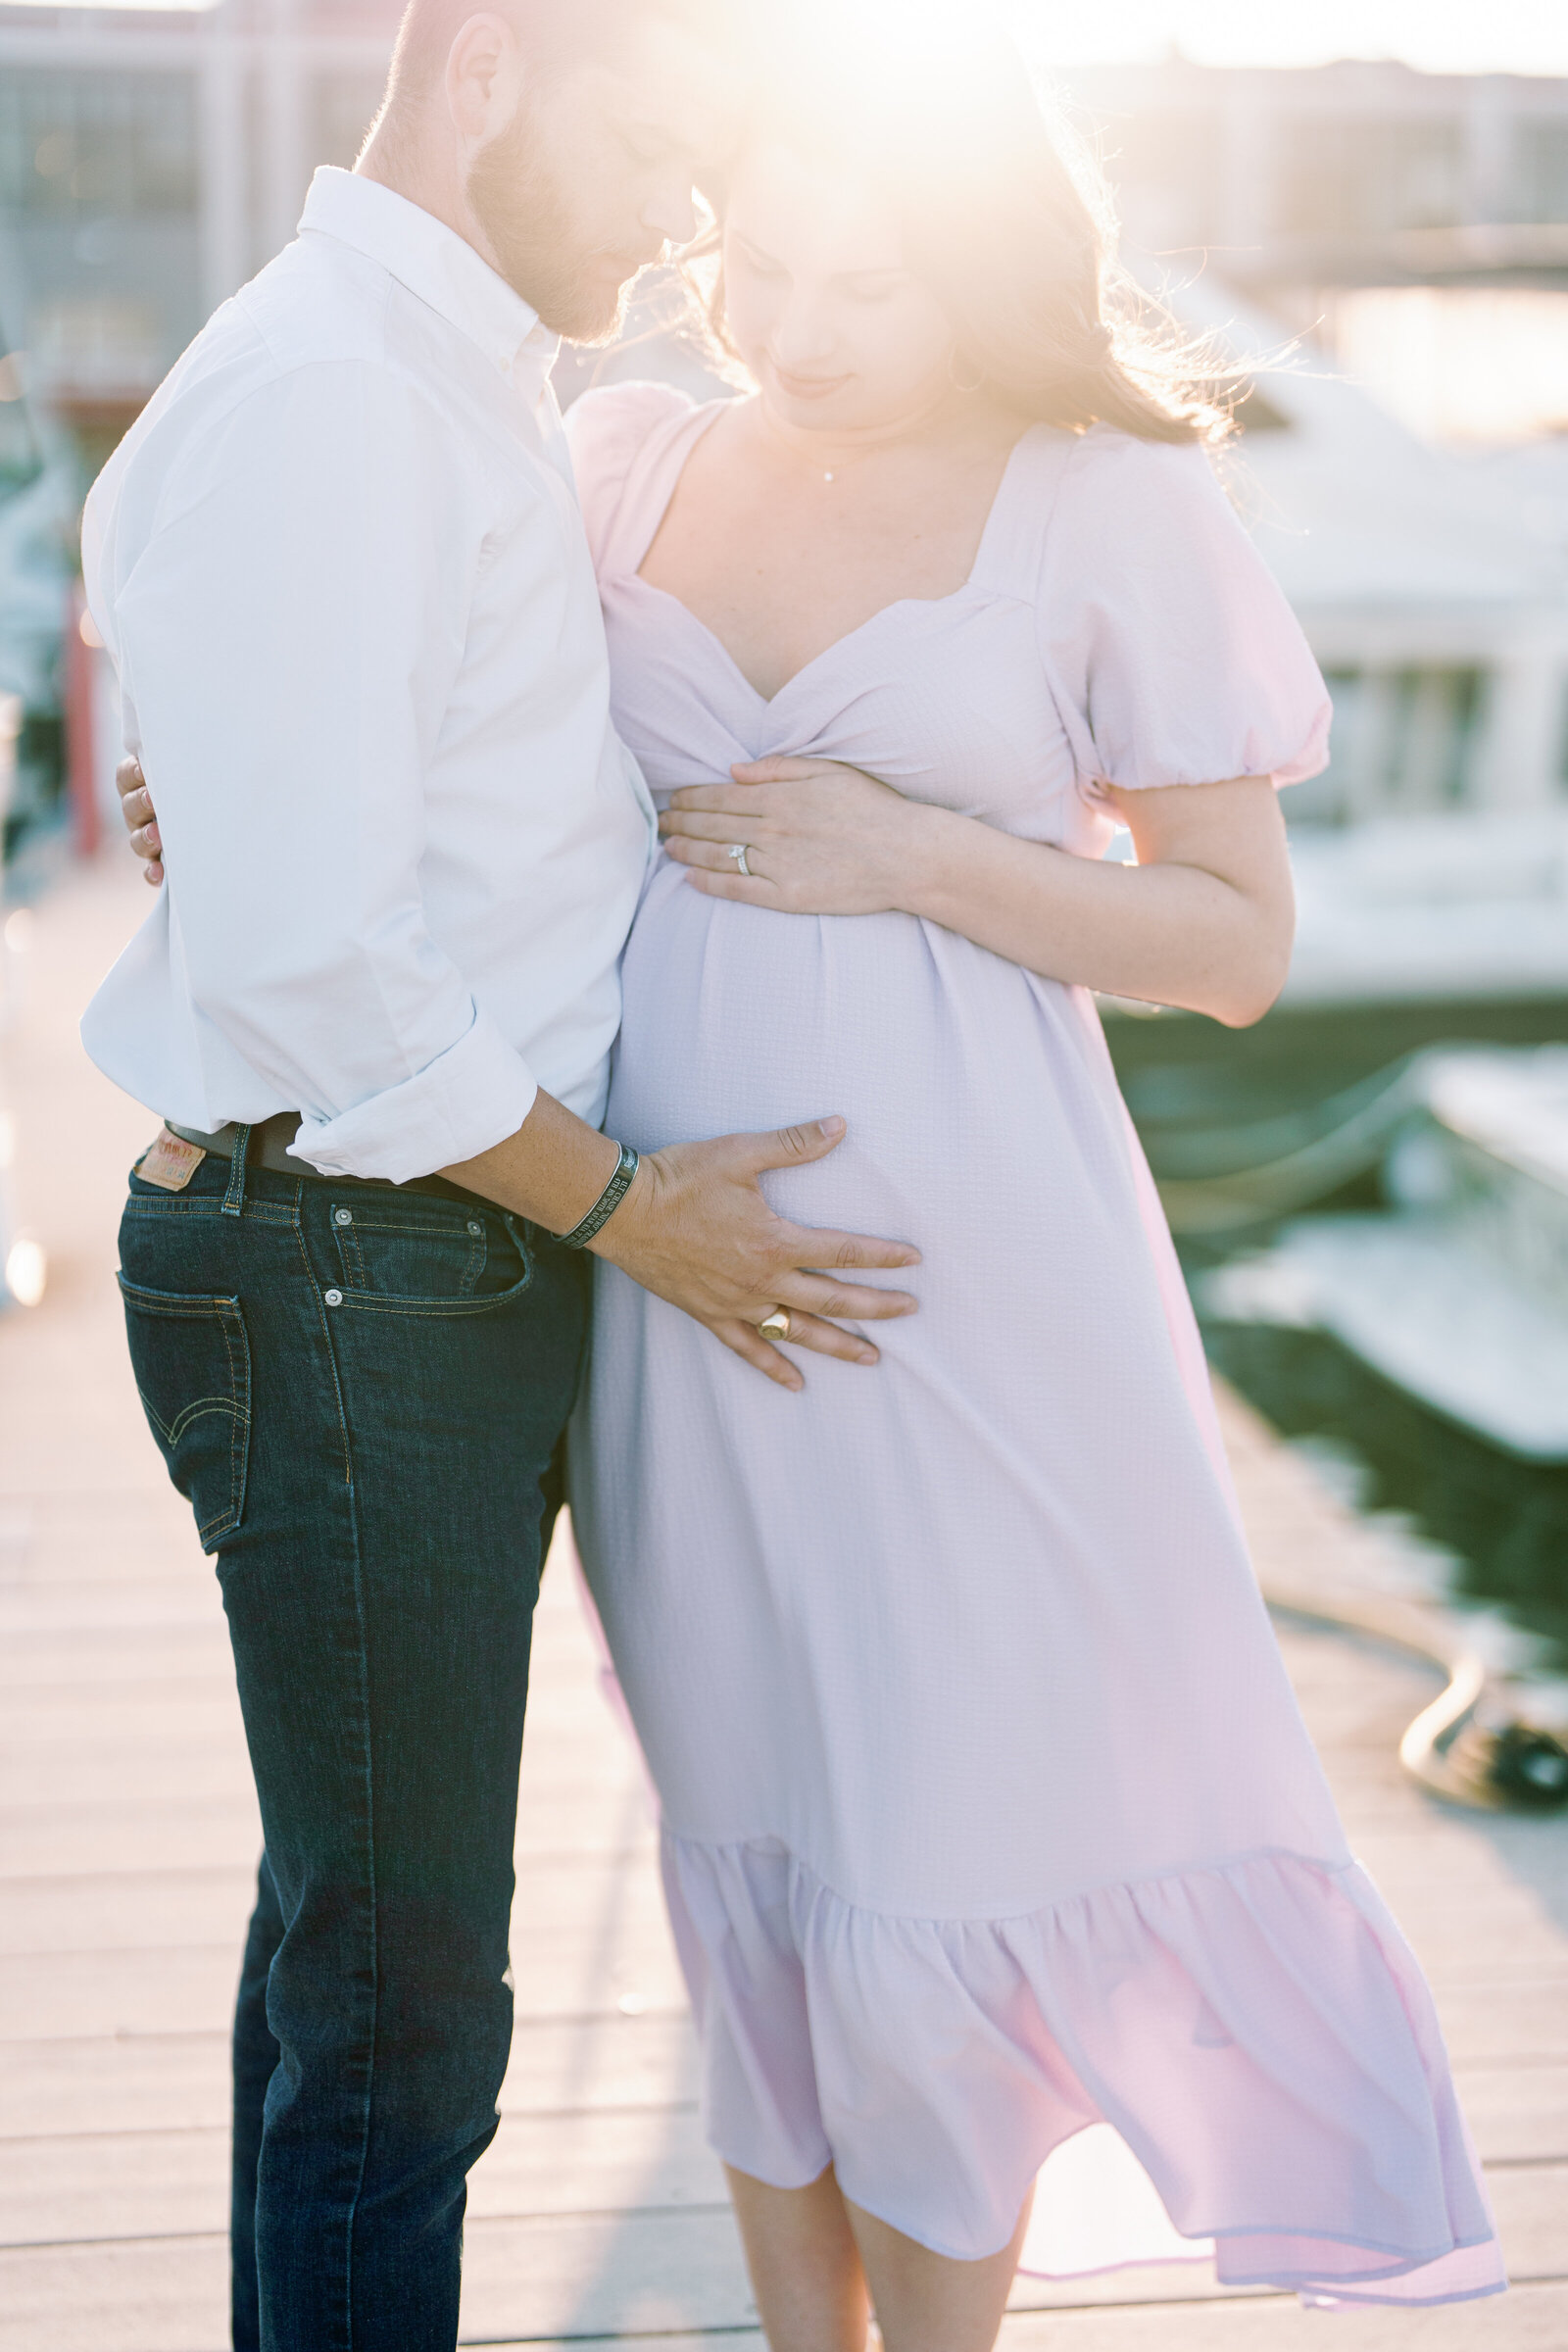 Klaire-Dixius-Photography-Northern-Virginia-Family-Photographer-Old-Town-Alexandria-Maternity-Session-Erica-200